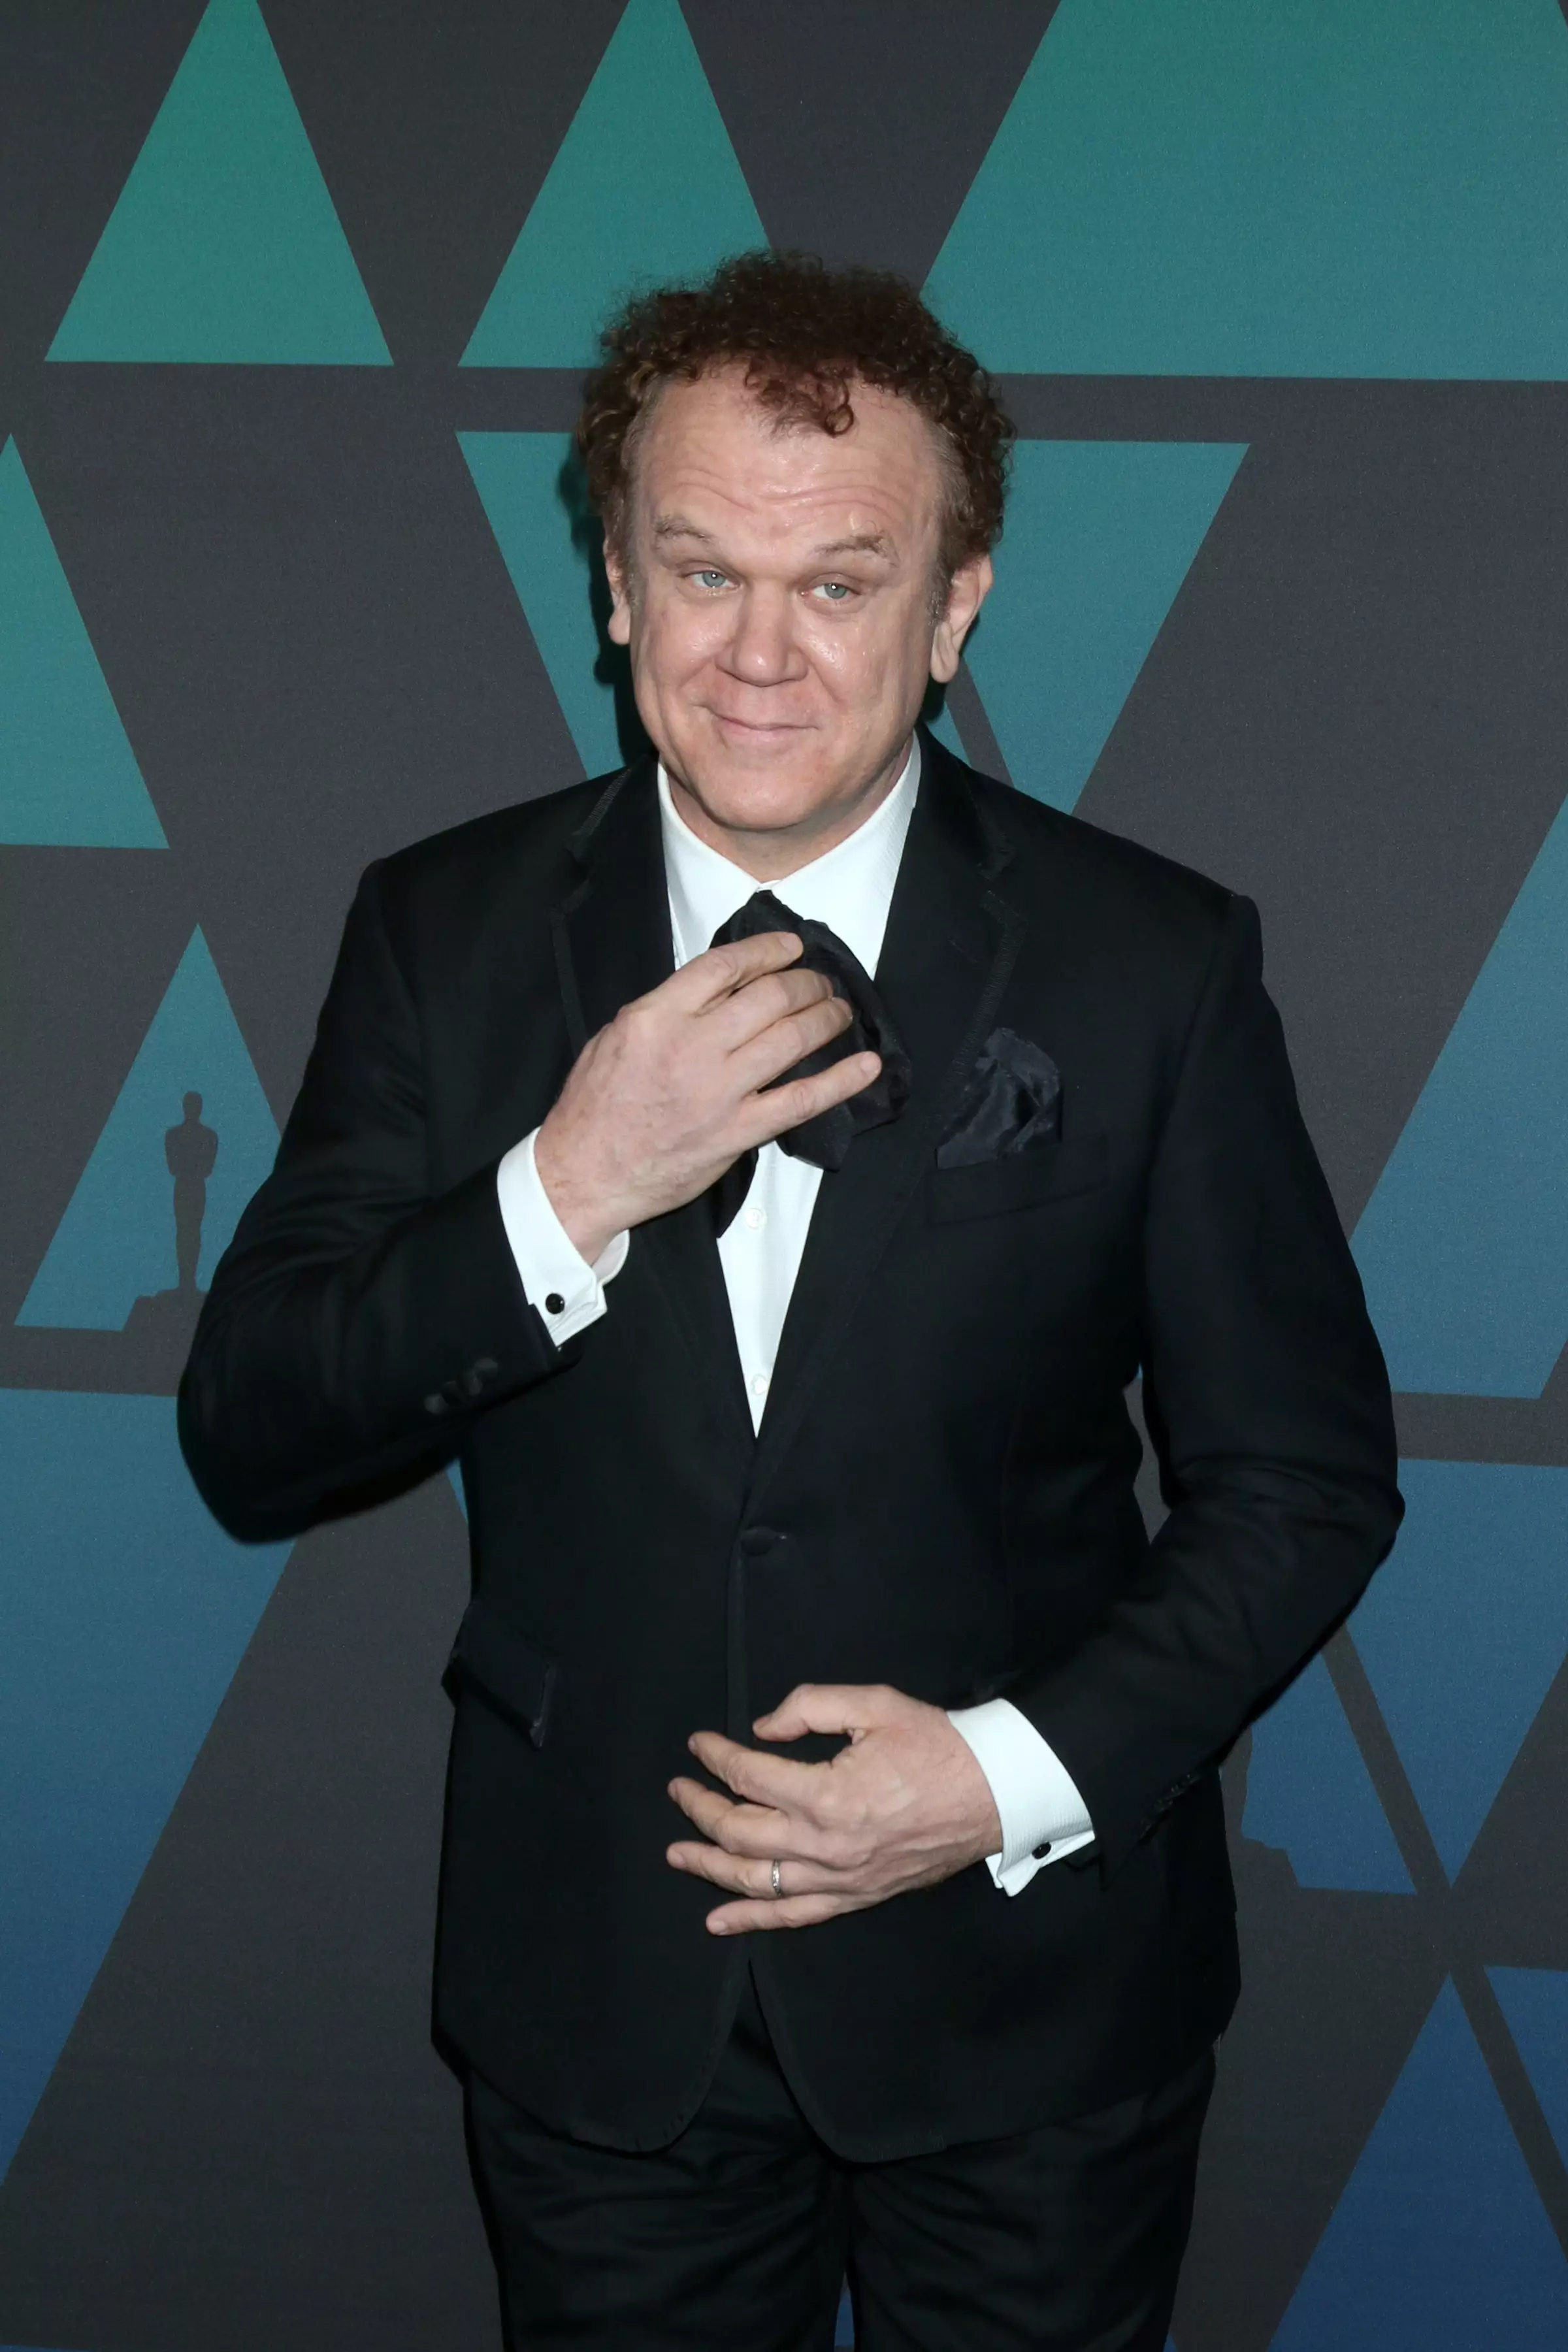 John C. Reilly has forged a career as the comedic stooge.